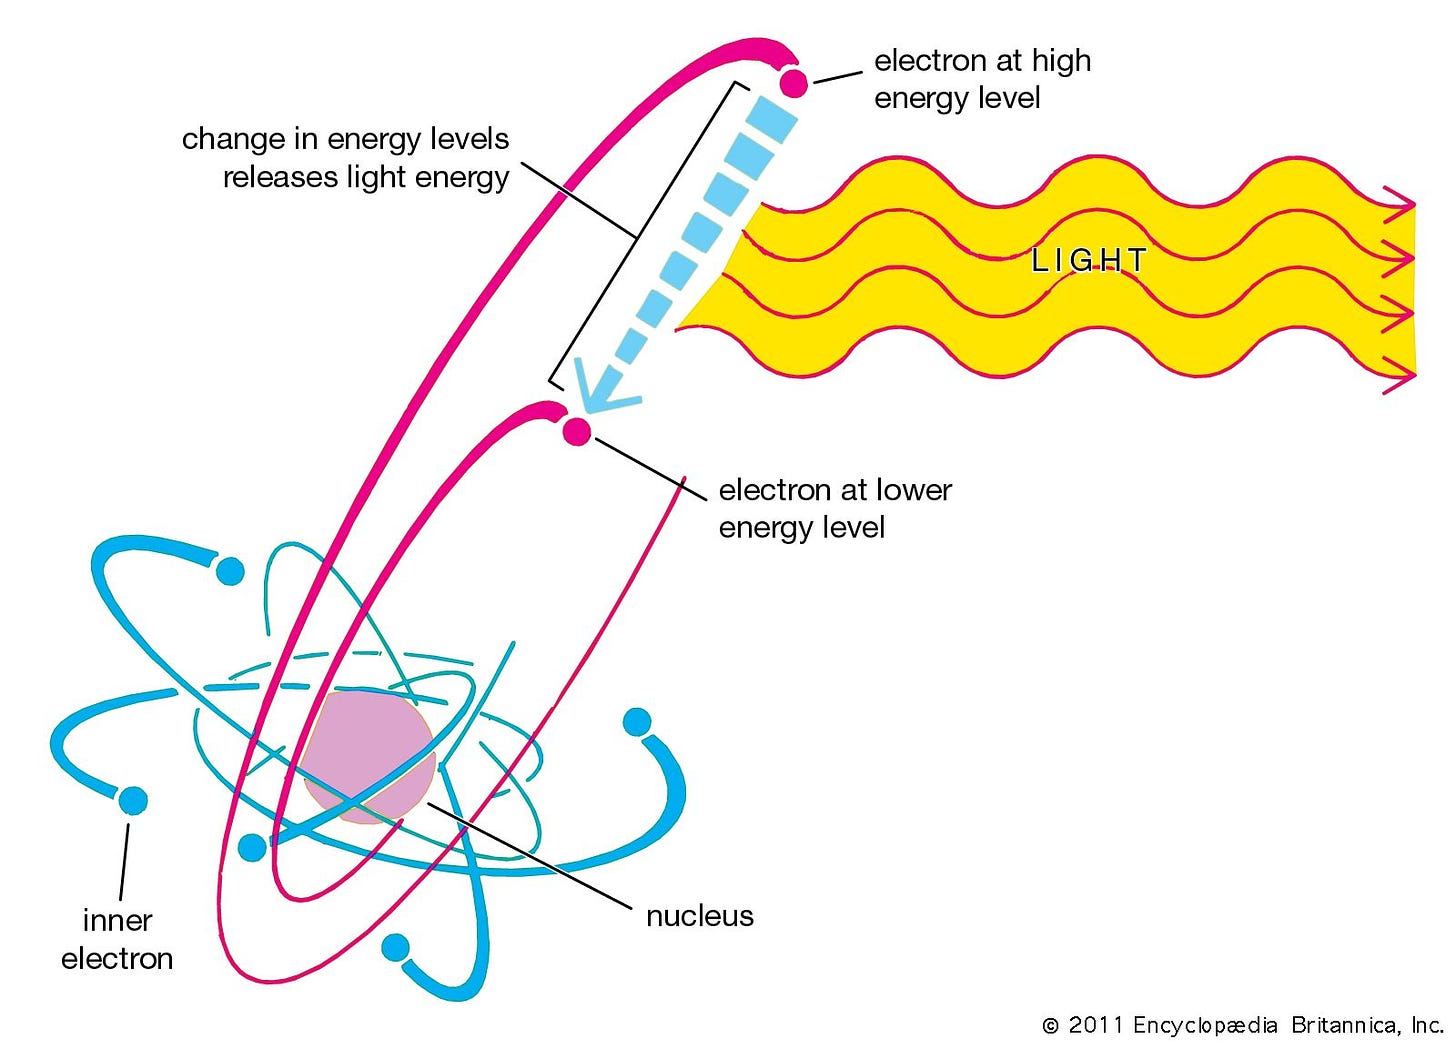 Light - Emission and absorption processes | Britannica